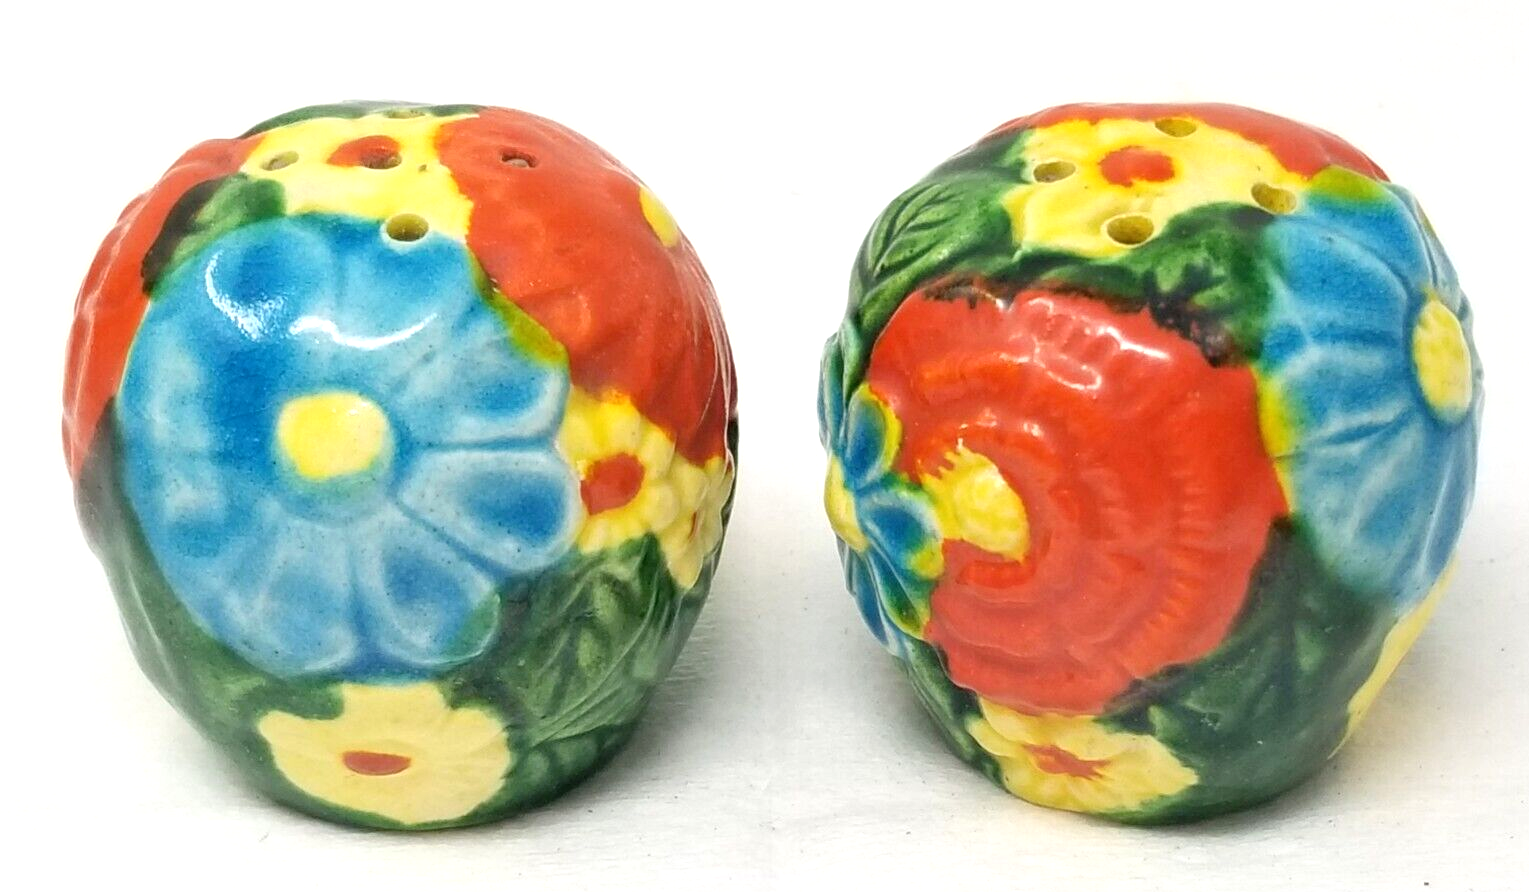 Primary image for Tropical Flowers Orbs Salt Pepper Shakers Japanese Ceramic Cheer Vibrant Small